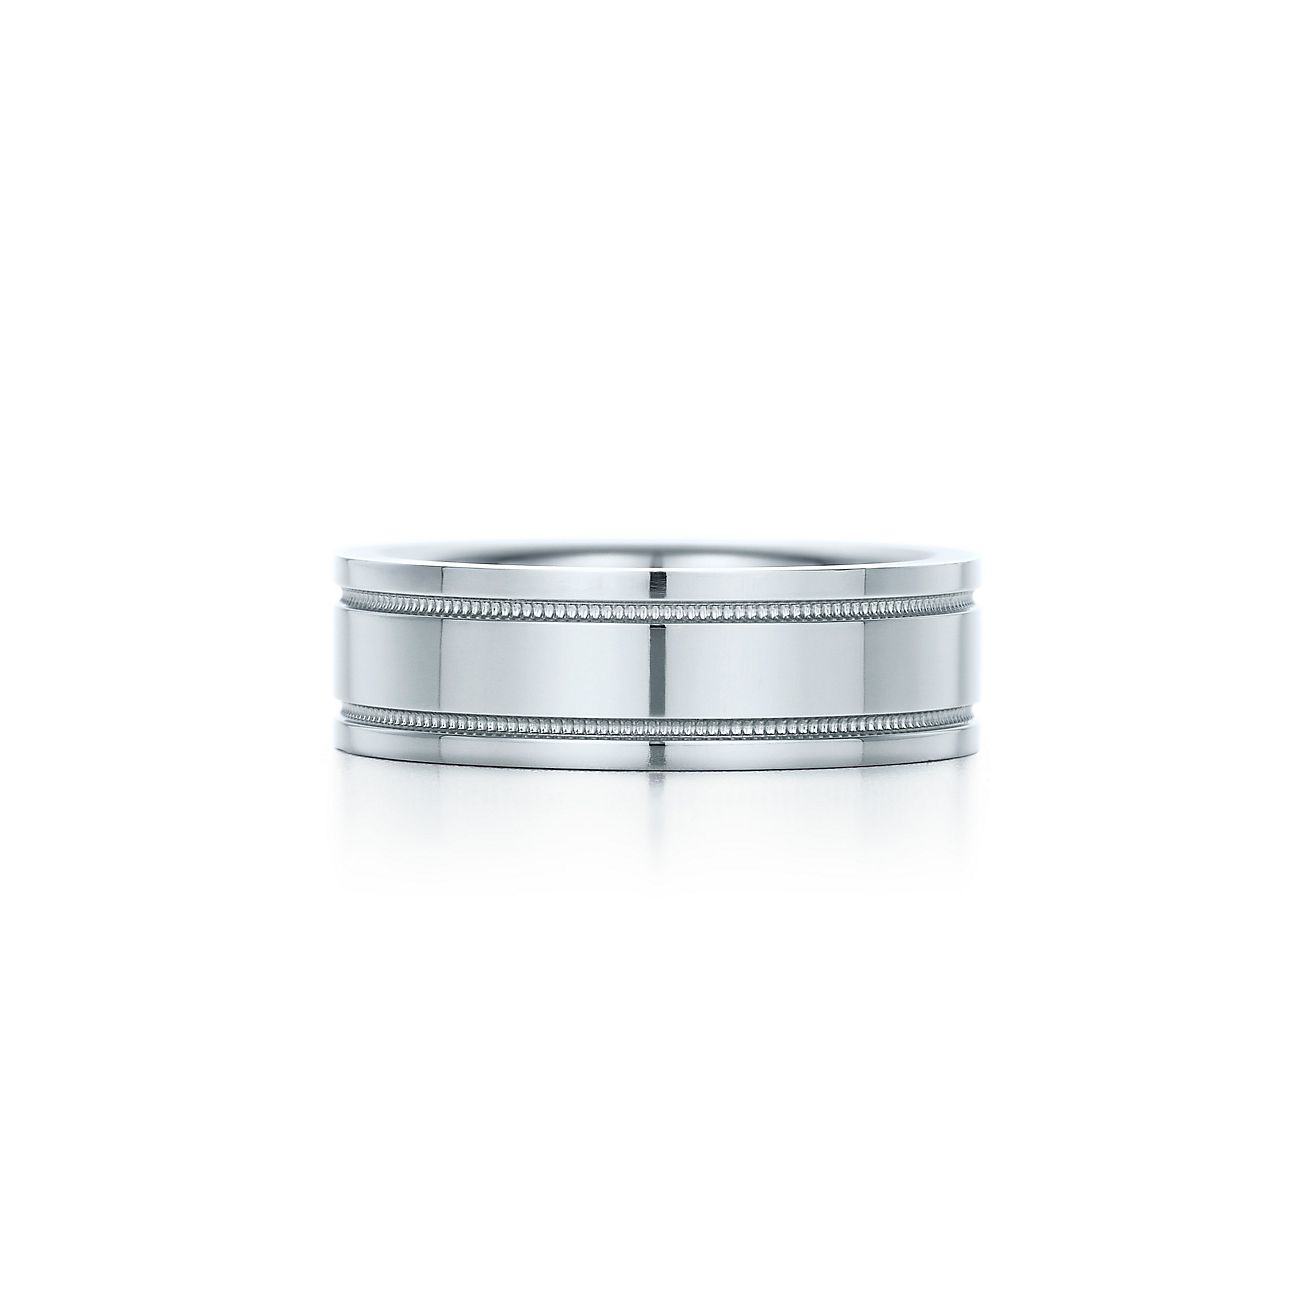 Tiffany Together Milgrain Band Ring in Platinum, 4 mm Wide| Tiffany & Co.